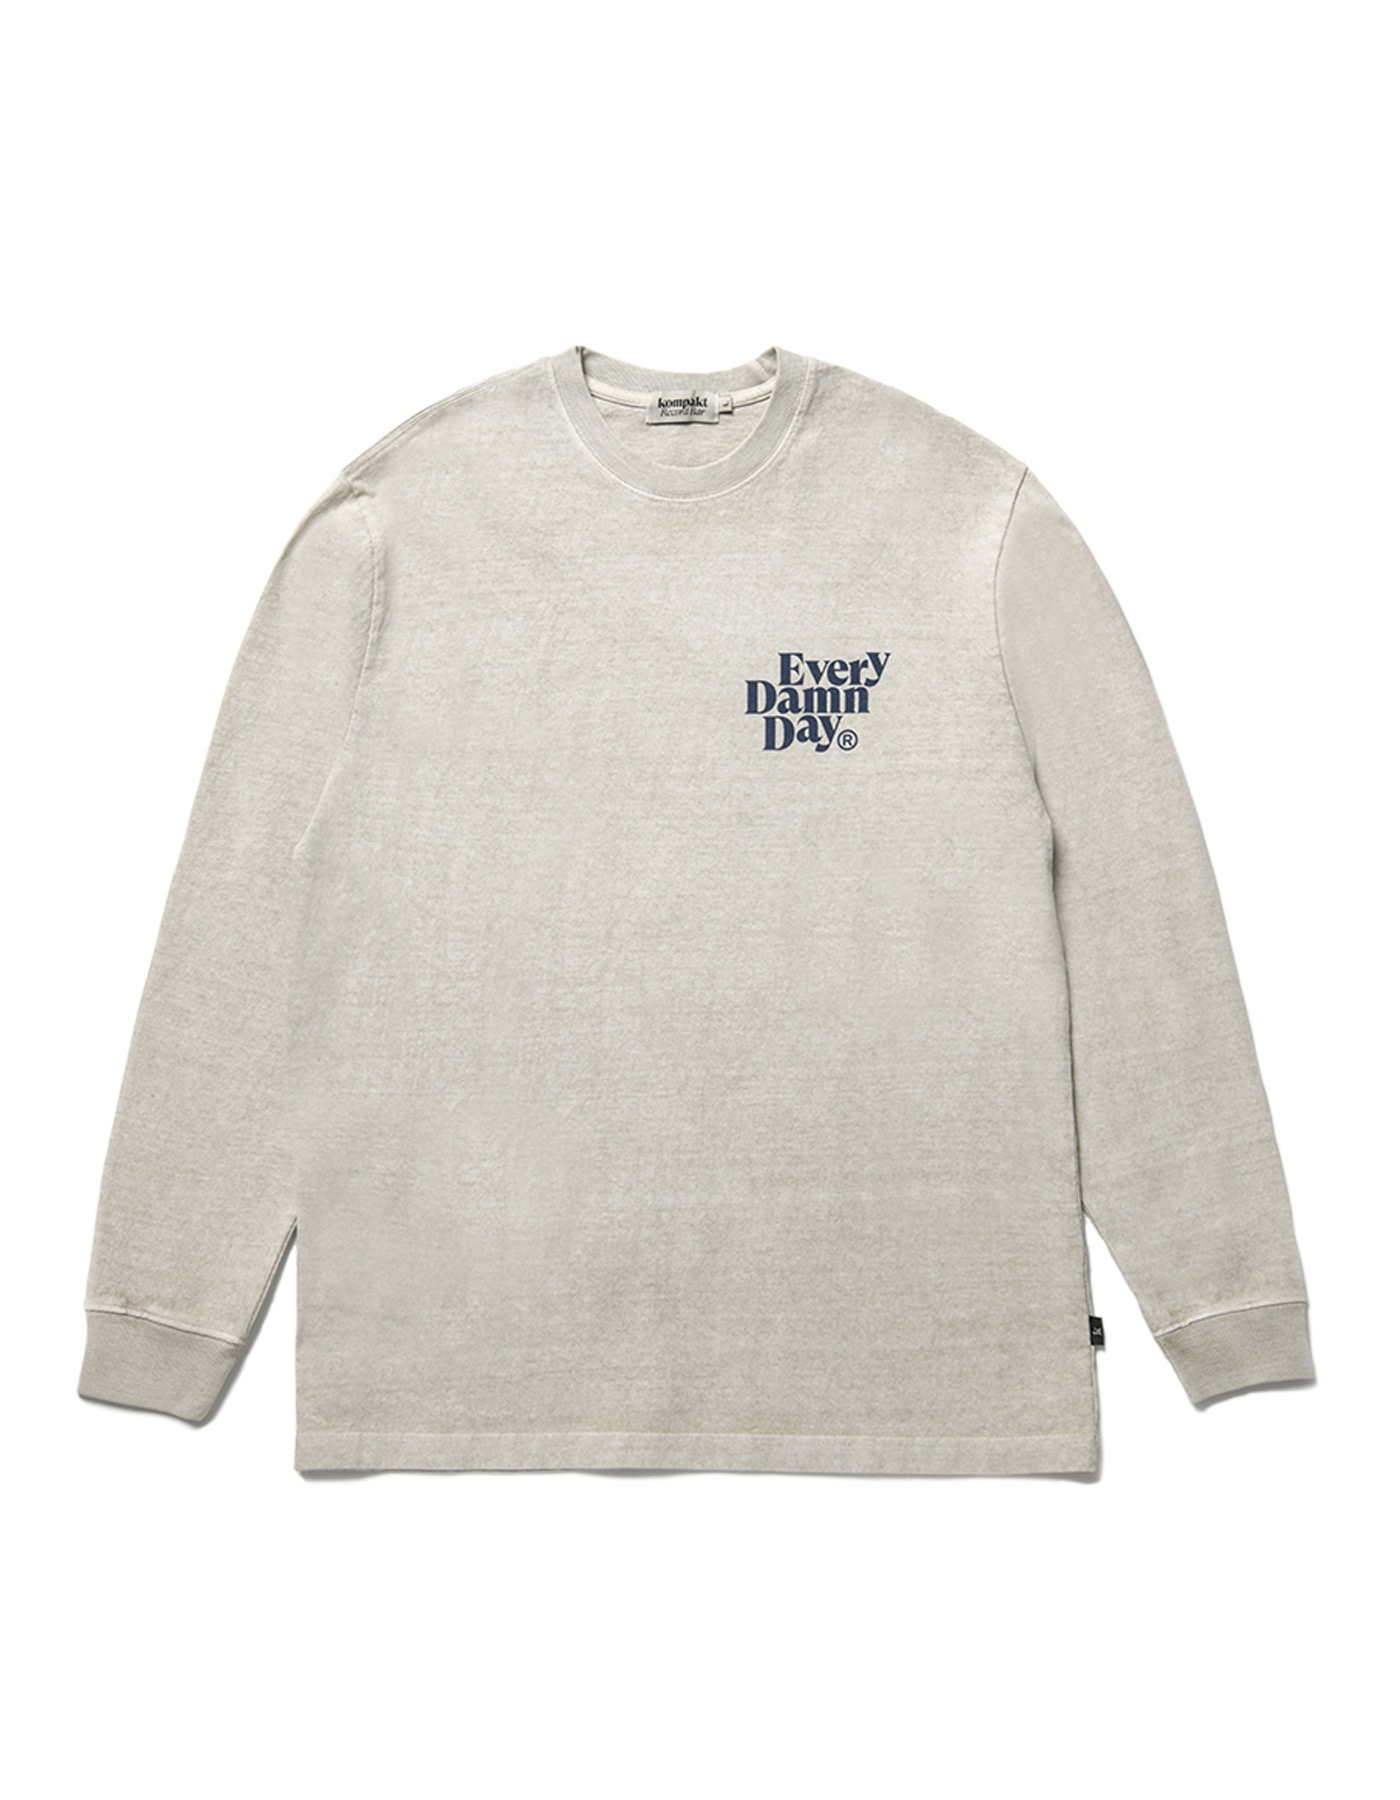 Every Damn Day Pigment L/S - Beige